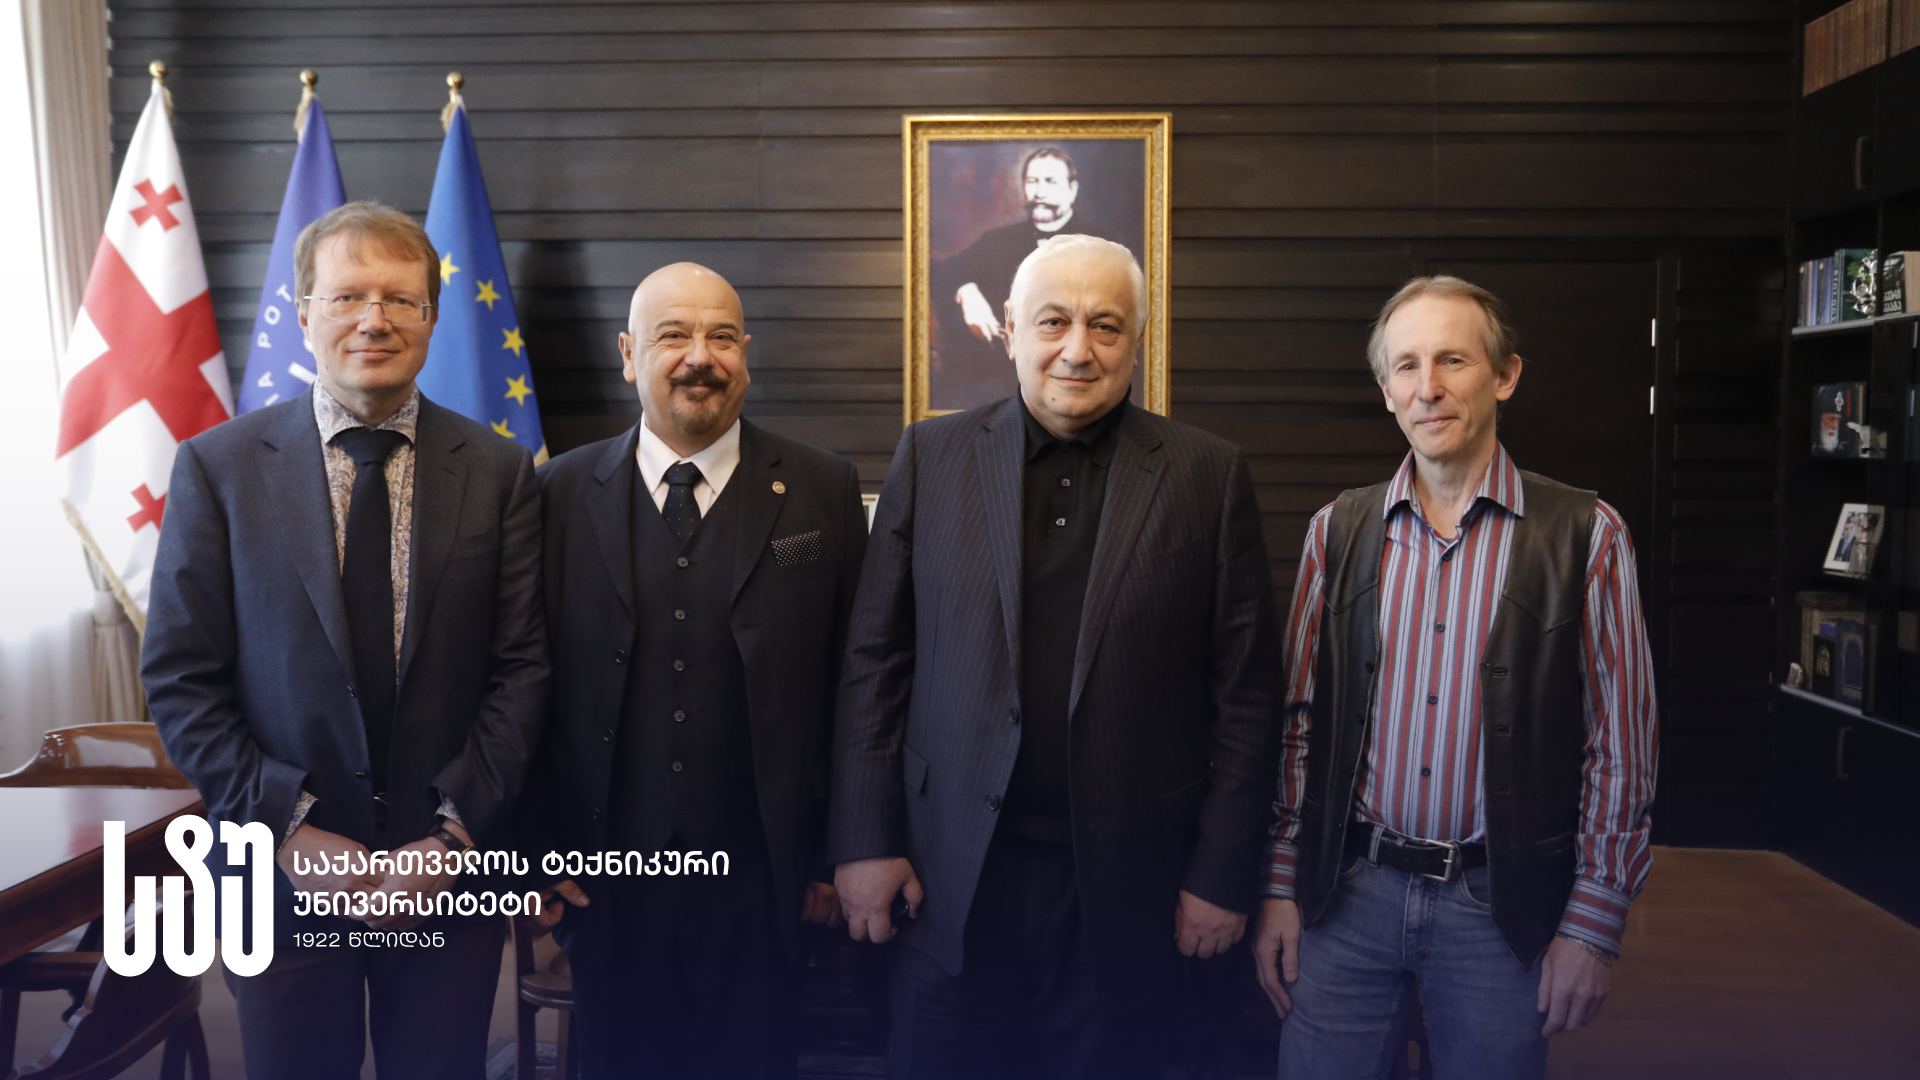 The Rector of GTU discussed with MIFP scientists the foundation of the International School of Physics